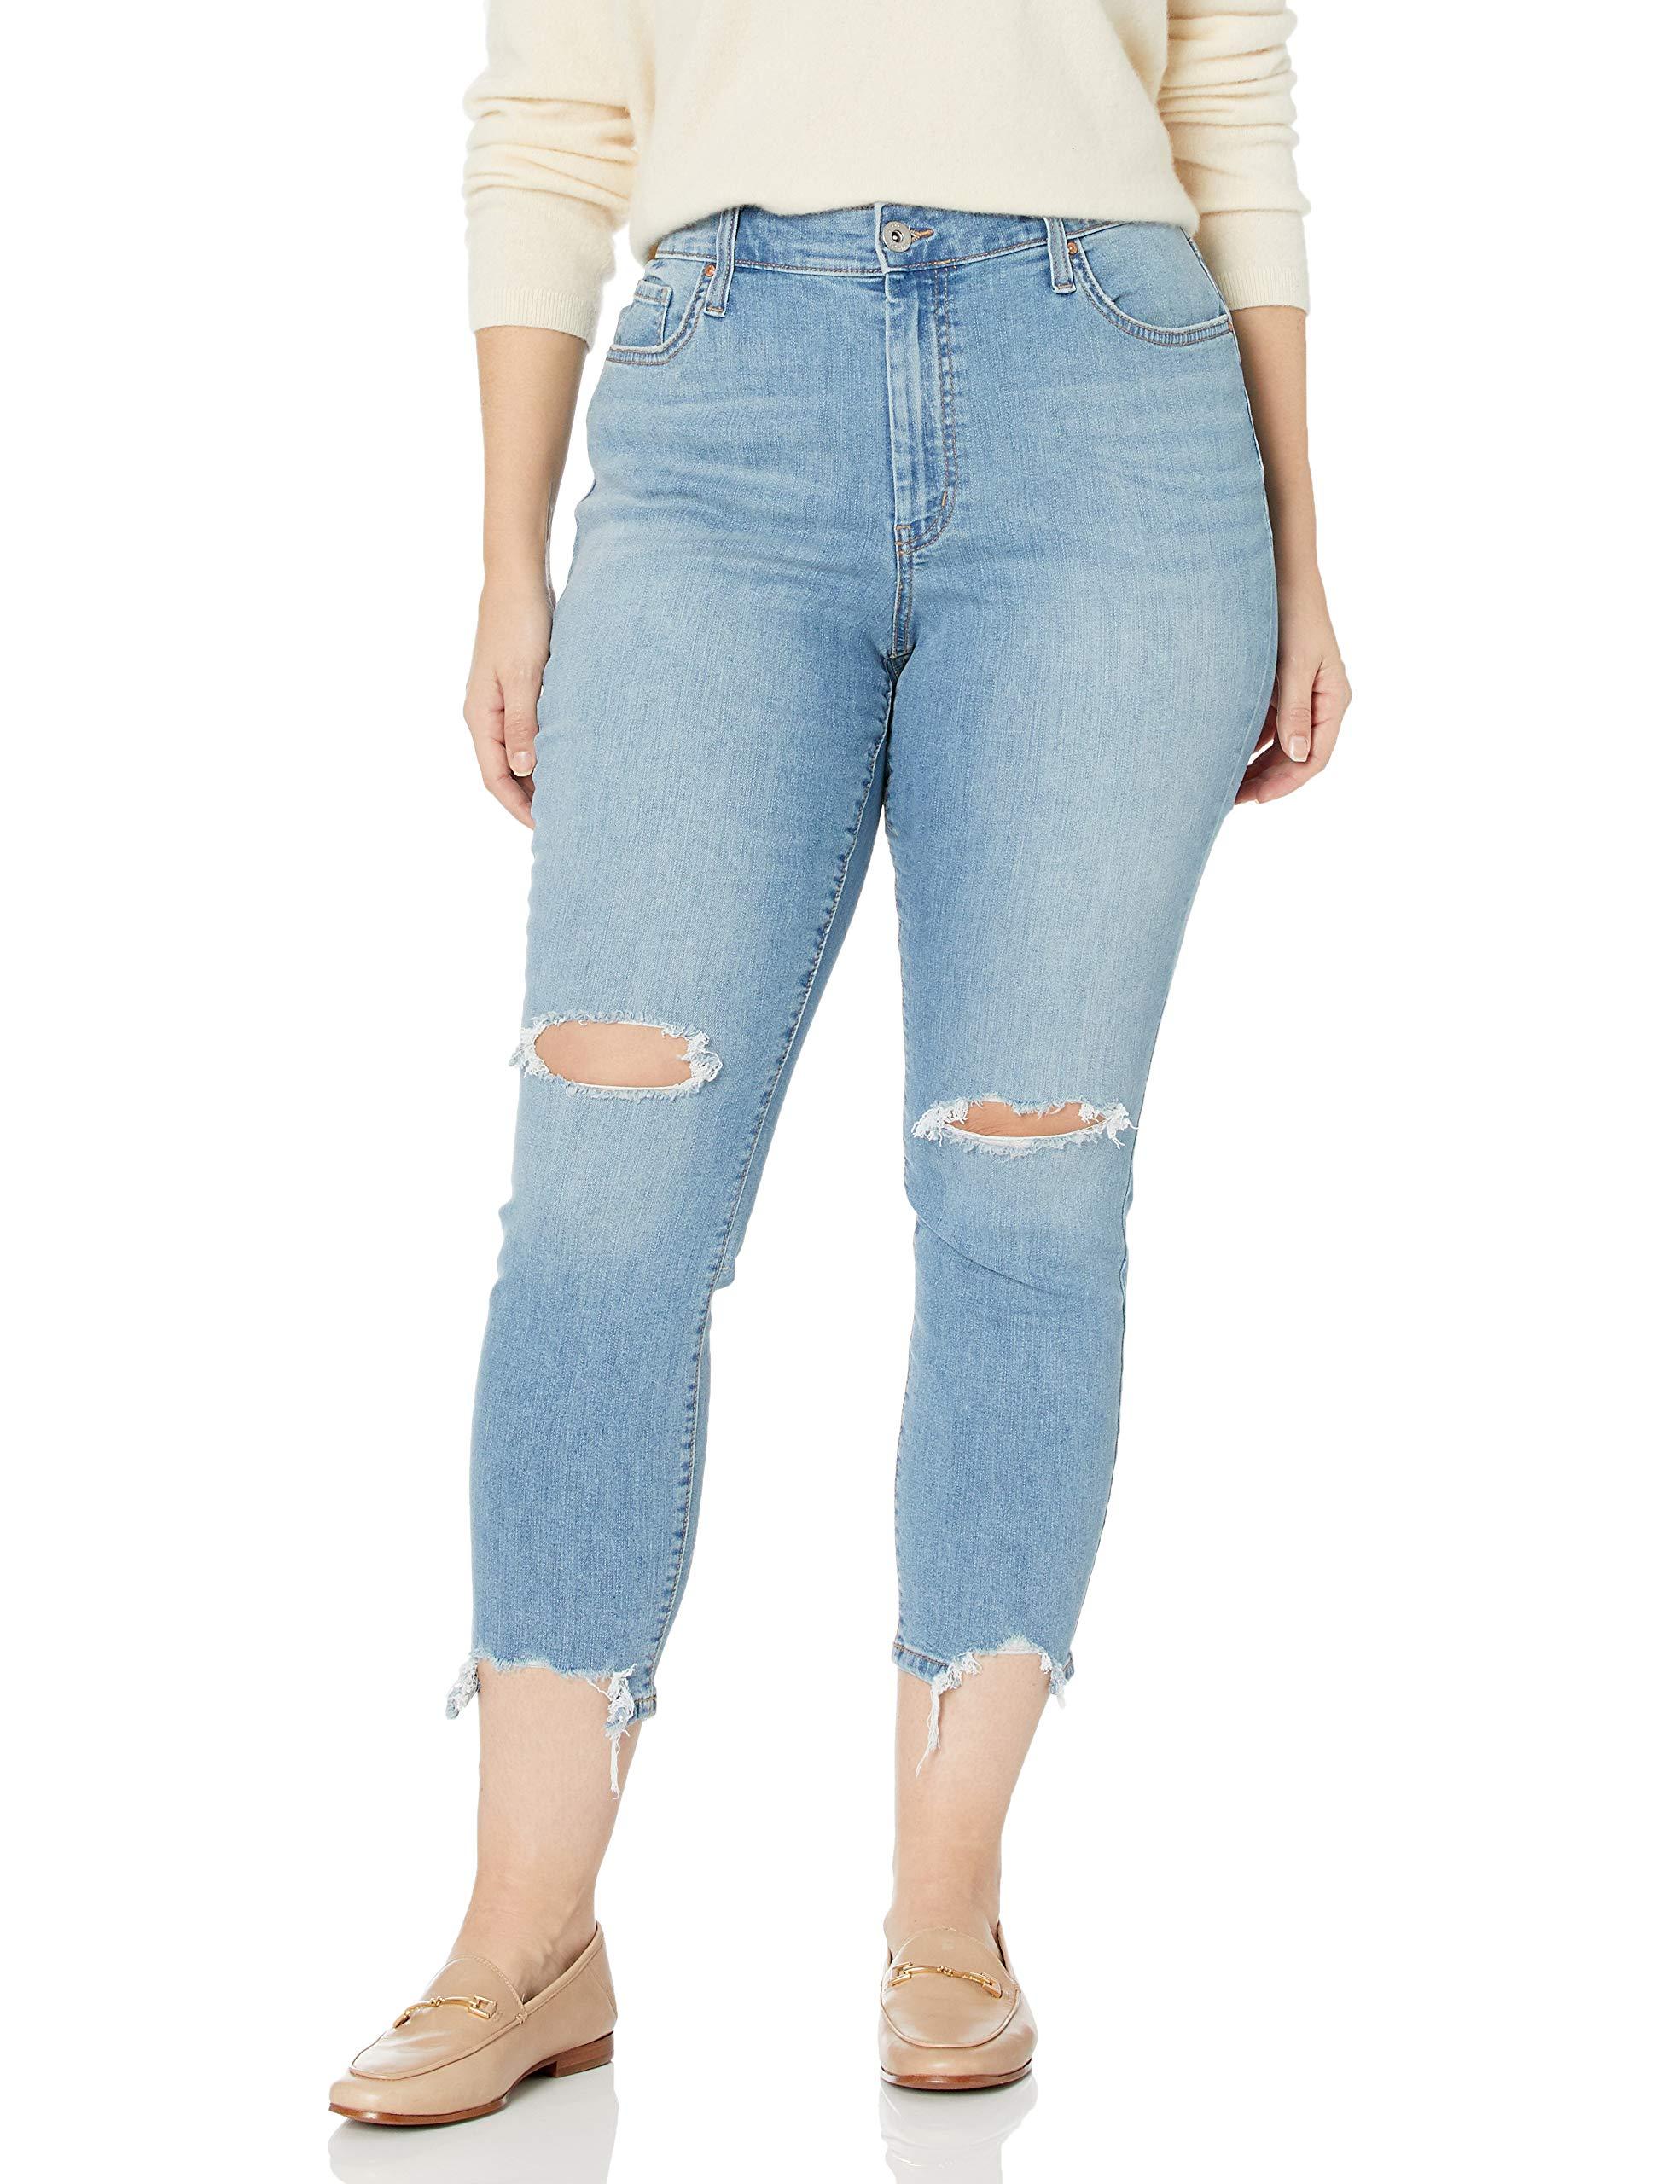 Jessica Simpson Plus Size Adored Curvy High Rise Ankle Skinny Jean in ...